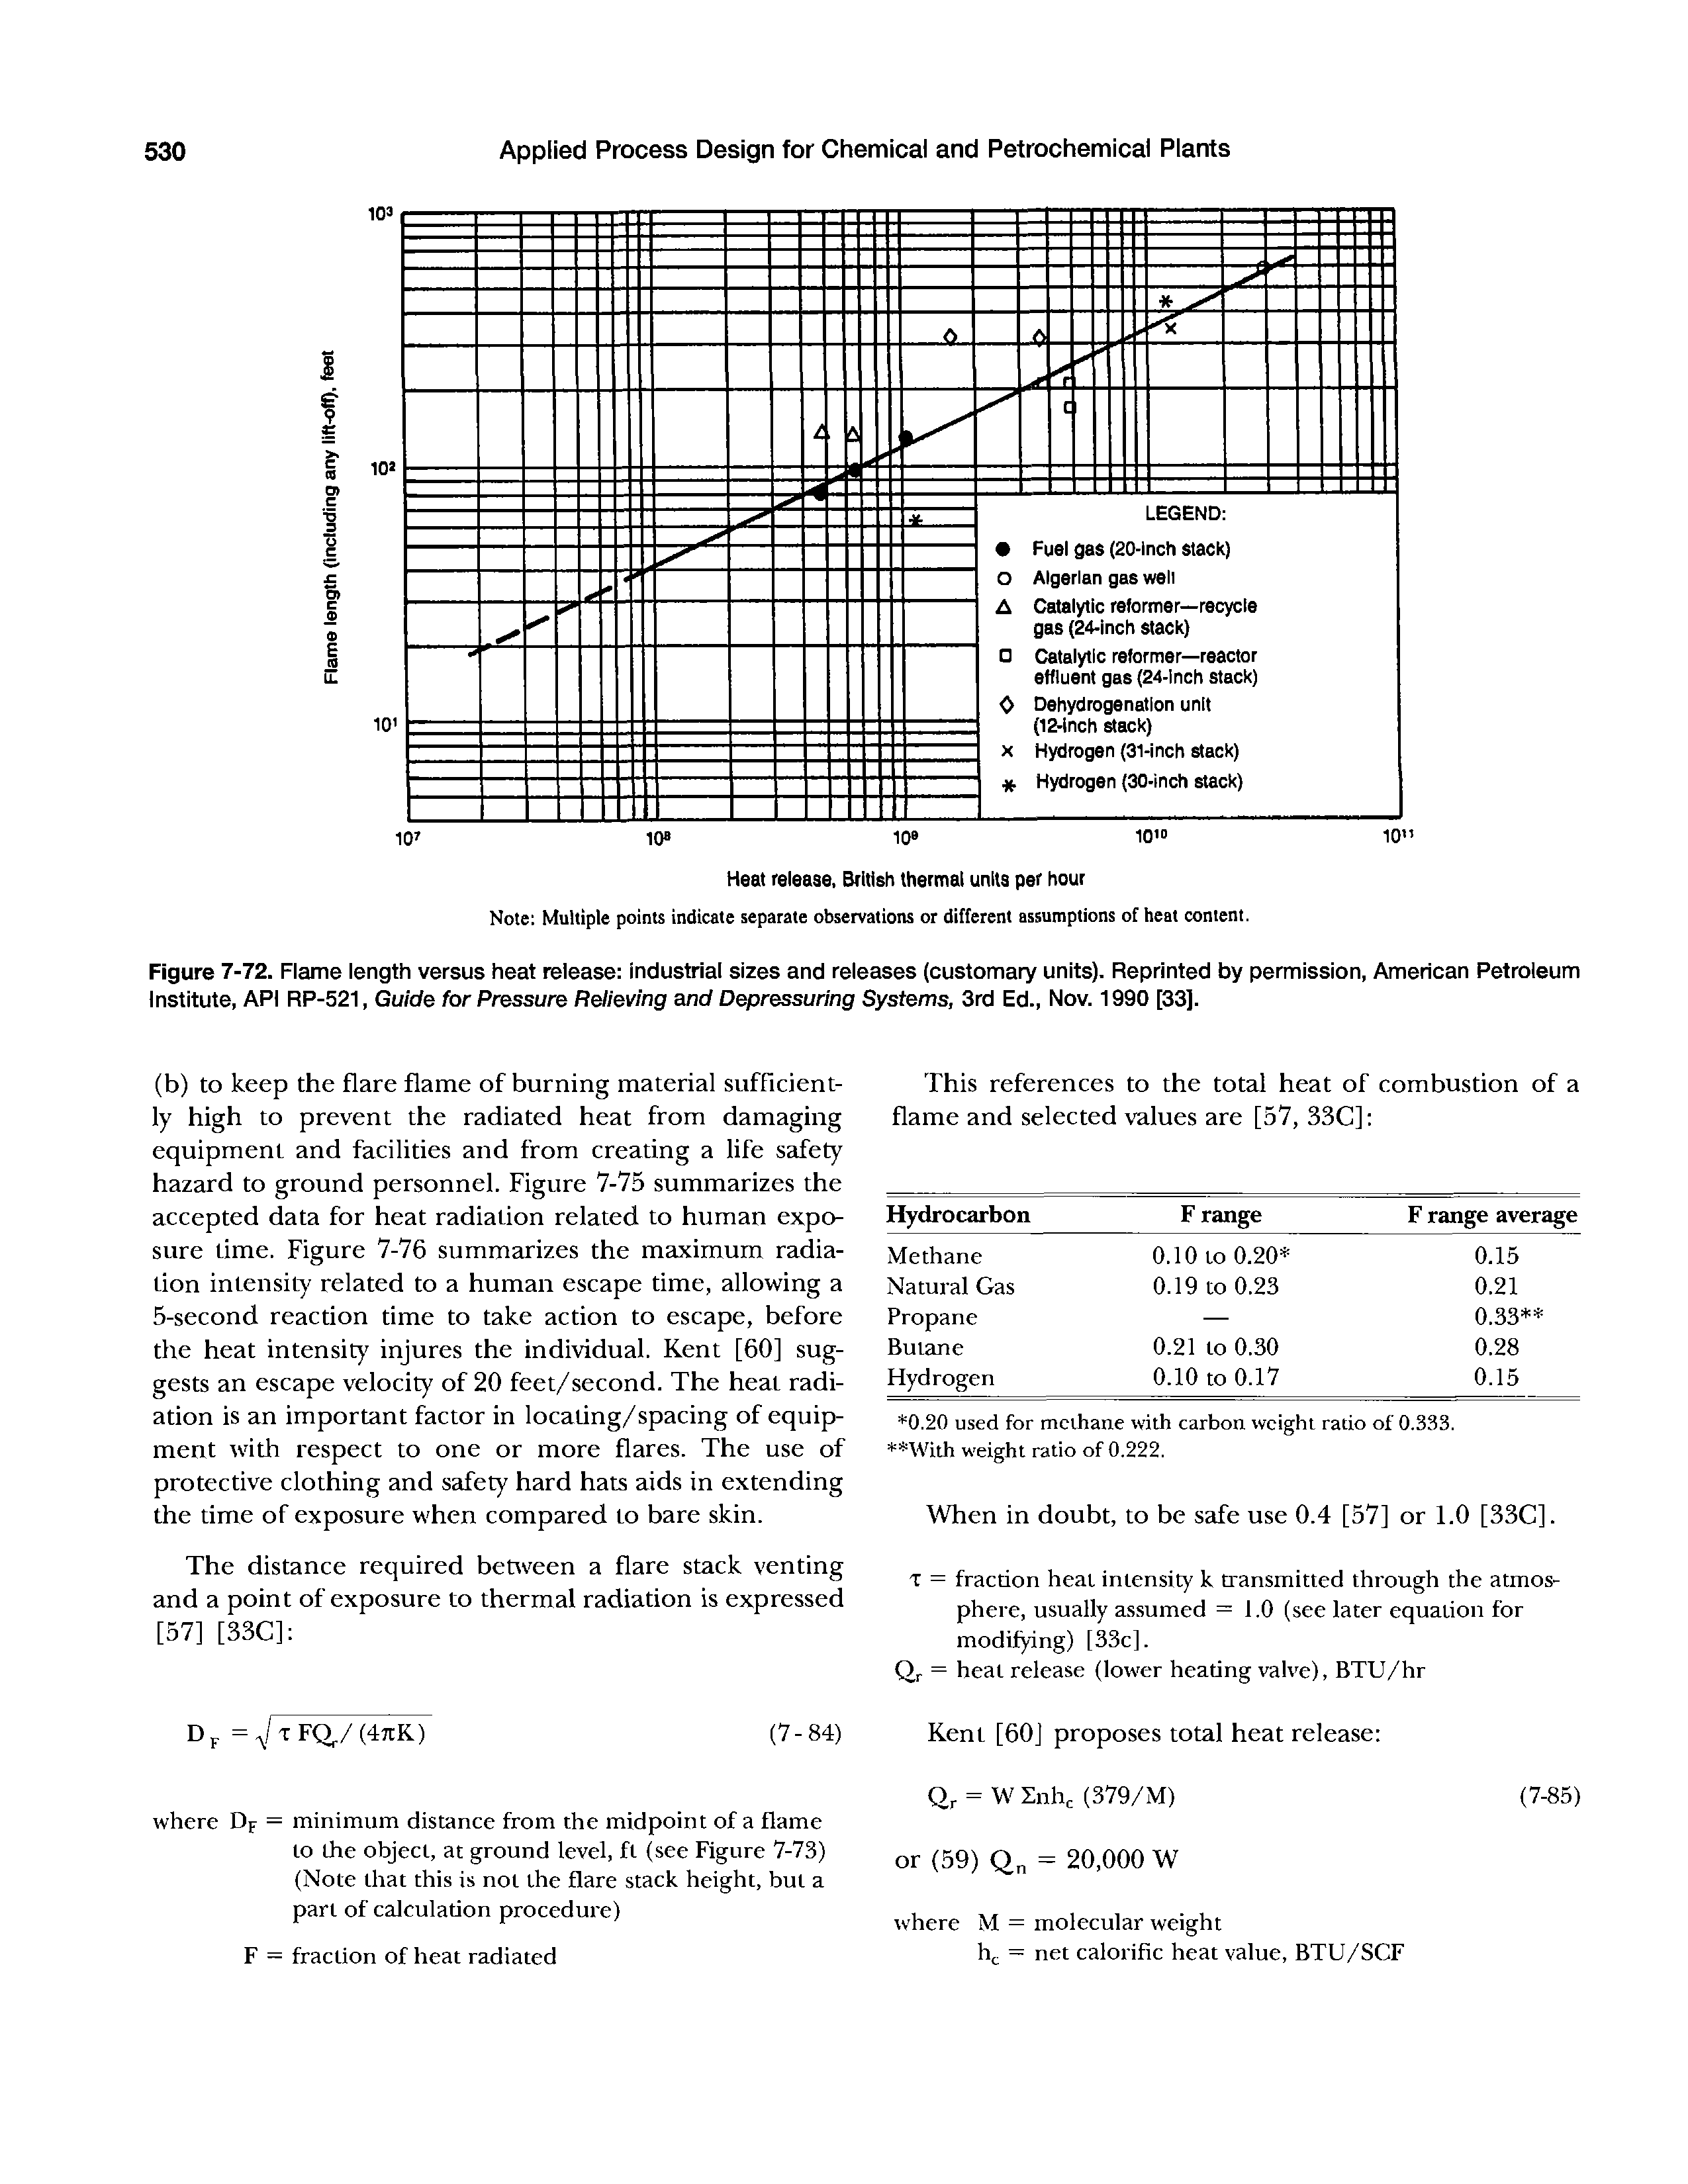 Figure 7-72. Flame length versus heat release industrial sizes and releases (customary units). Reprinted by permission, American Petroleum Institute, API RP-521, Guide for Pressure Relieving and Depressuring Systems, 3rd Ed., Nov. 1990 [33].